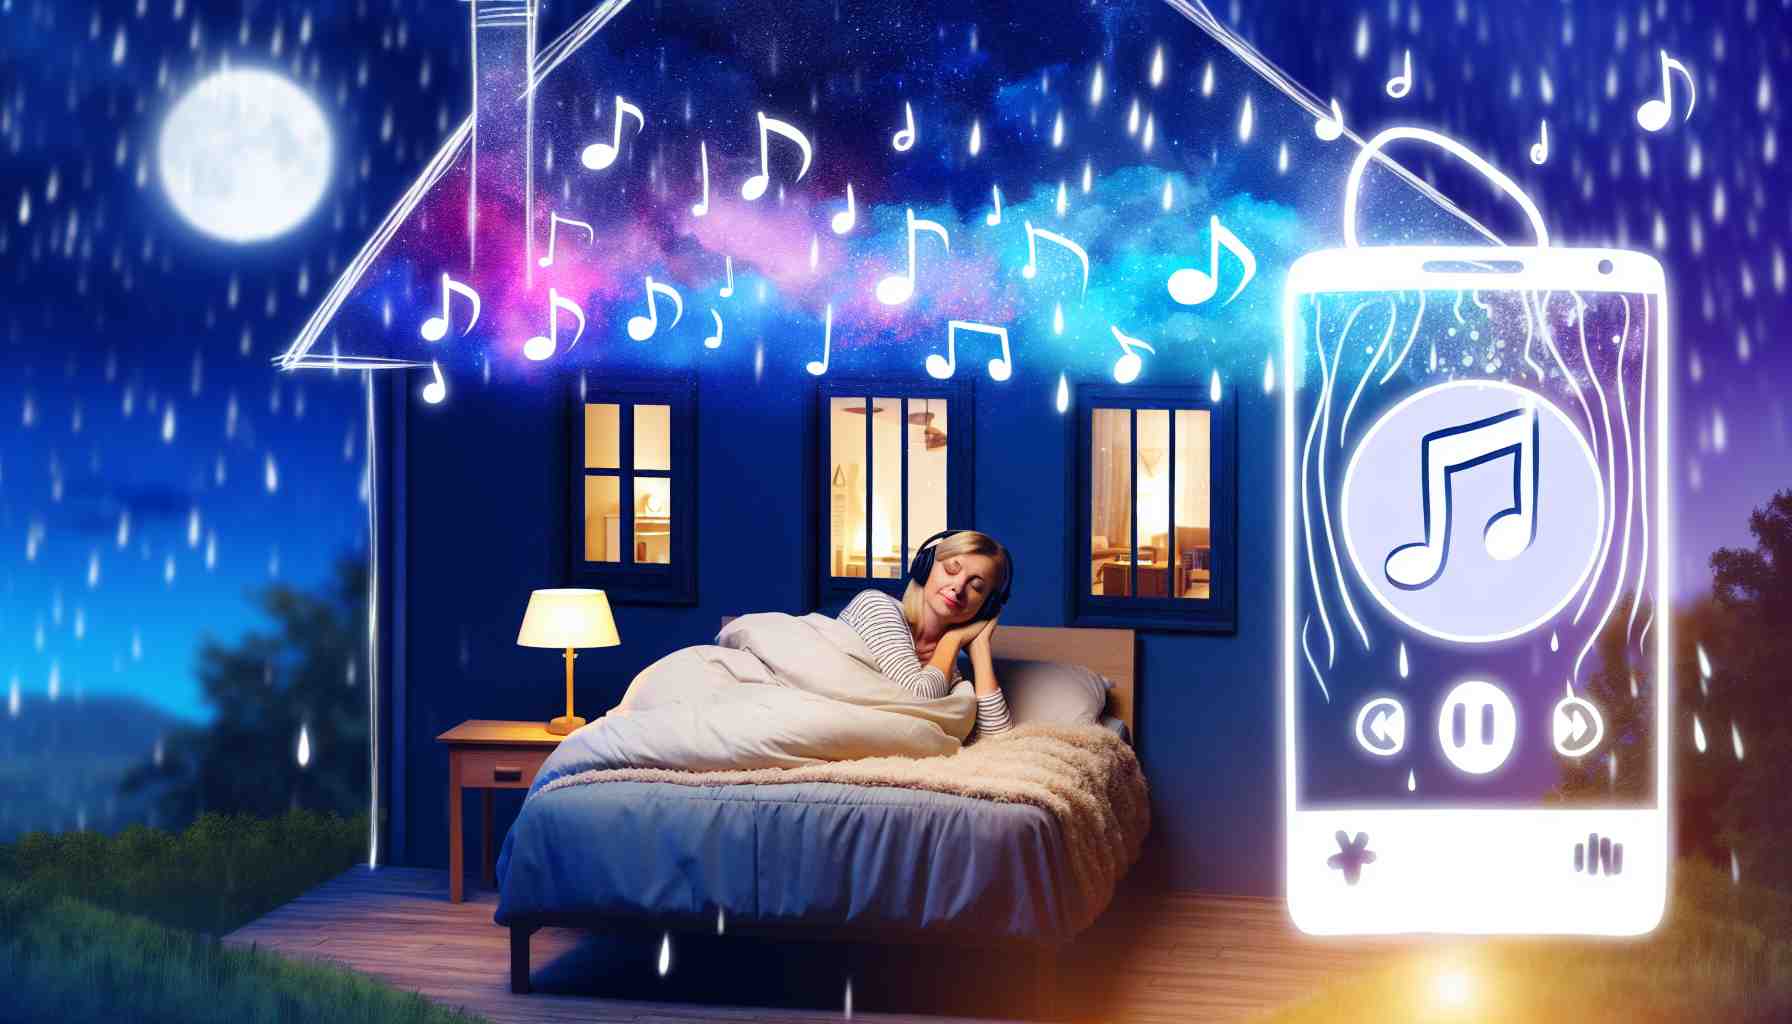 Troubled by sleepless nights? Dive into the soothing rhythm of nature's tranquil tune with the absolute best rain sounds for sleep. Let the reign of insomnia end!